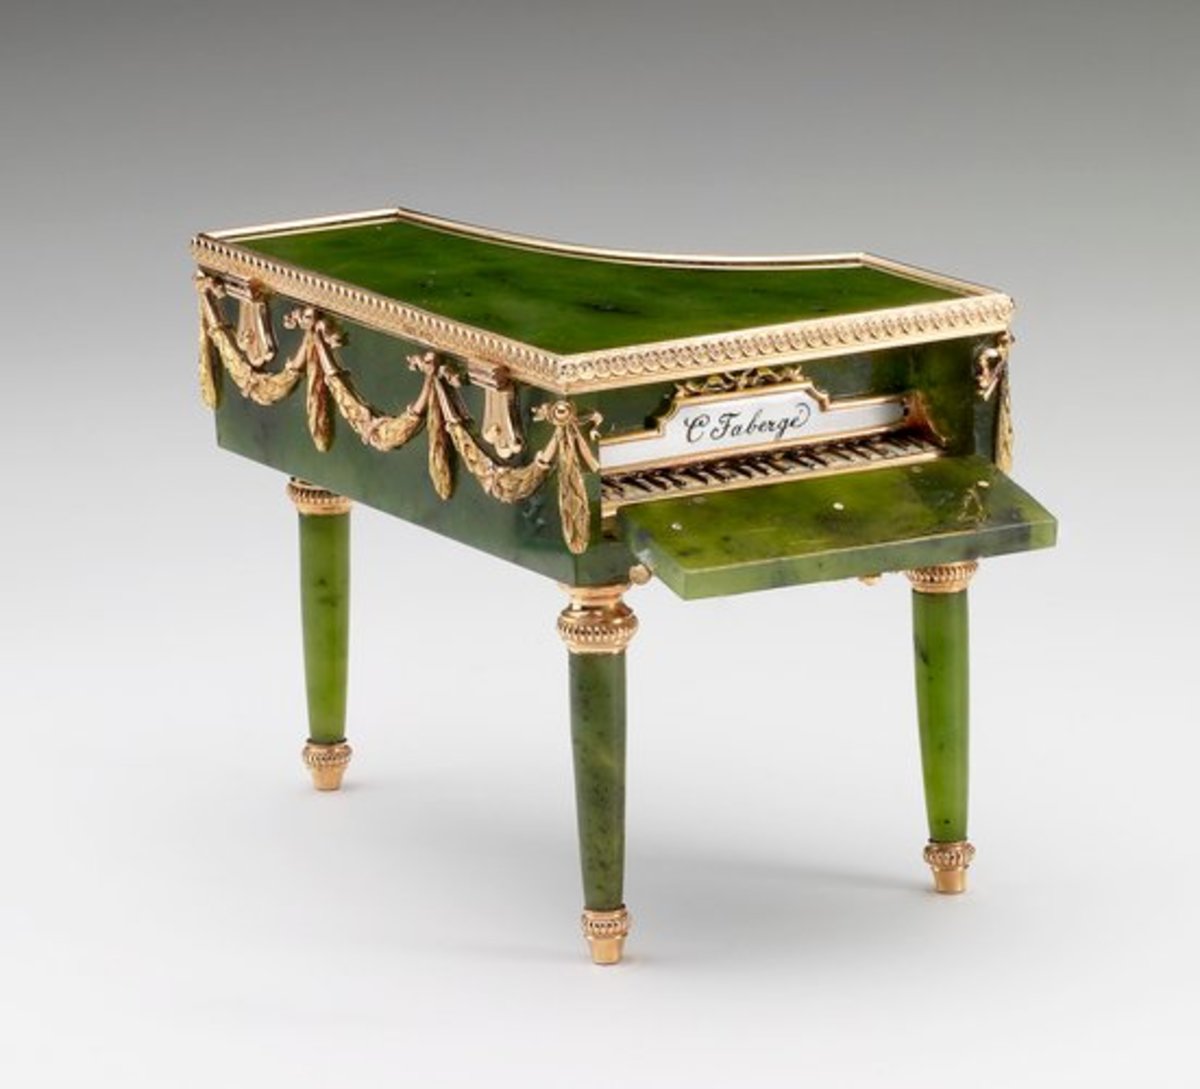 This miniature grand piano in Louis XVI style was made by Mikhail Perkhin. It’s made of nephrite with mounts of red and green gold, and the keyboard is opaque black and white enamel. Foliate swag mounts are around the edge and the top is hinged; 2” x 2.8” x 2”. Judging by her acquisitions, Queen Mary was particularly fond of Fabergé’s miniature objets de fantasie, which include several examples of miniature furniture in the form of bonbonnières. These objects afforded the craftsman the opportunity to demonstrate skill in applying specialist techniques to replicate the real materials of the full-scale object. This miniature piano of Siberian nephrite is carved and polished to resemble ebonized wood. The lid opens for use as a bonbonnière and the front drops down to reveal the keyboard in gold and enamel, inscribed “C. Fabergé.” The piano belonged originally to Tsarina Alexandra Feodorovna and is also seen in one of the display cases in photographs of the exhibition of Fabergé held in St. Petersburg in 1902. Queen Mary acquired it sometime between 1922-1931.